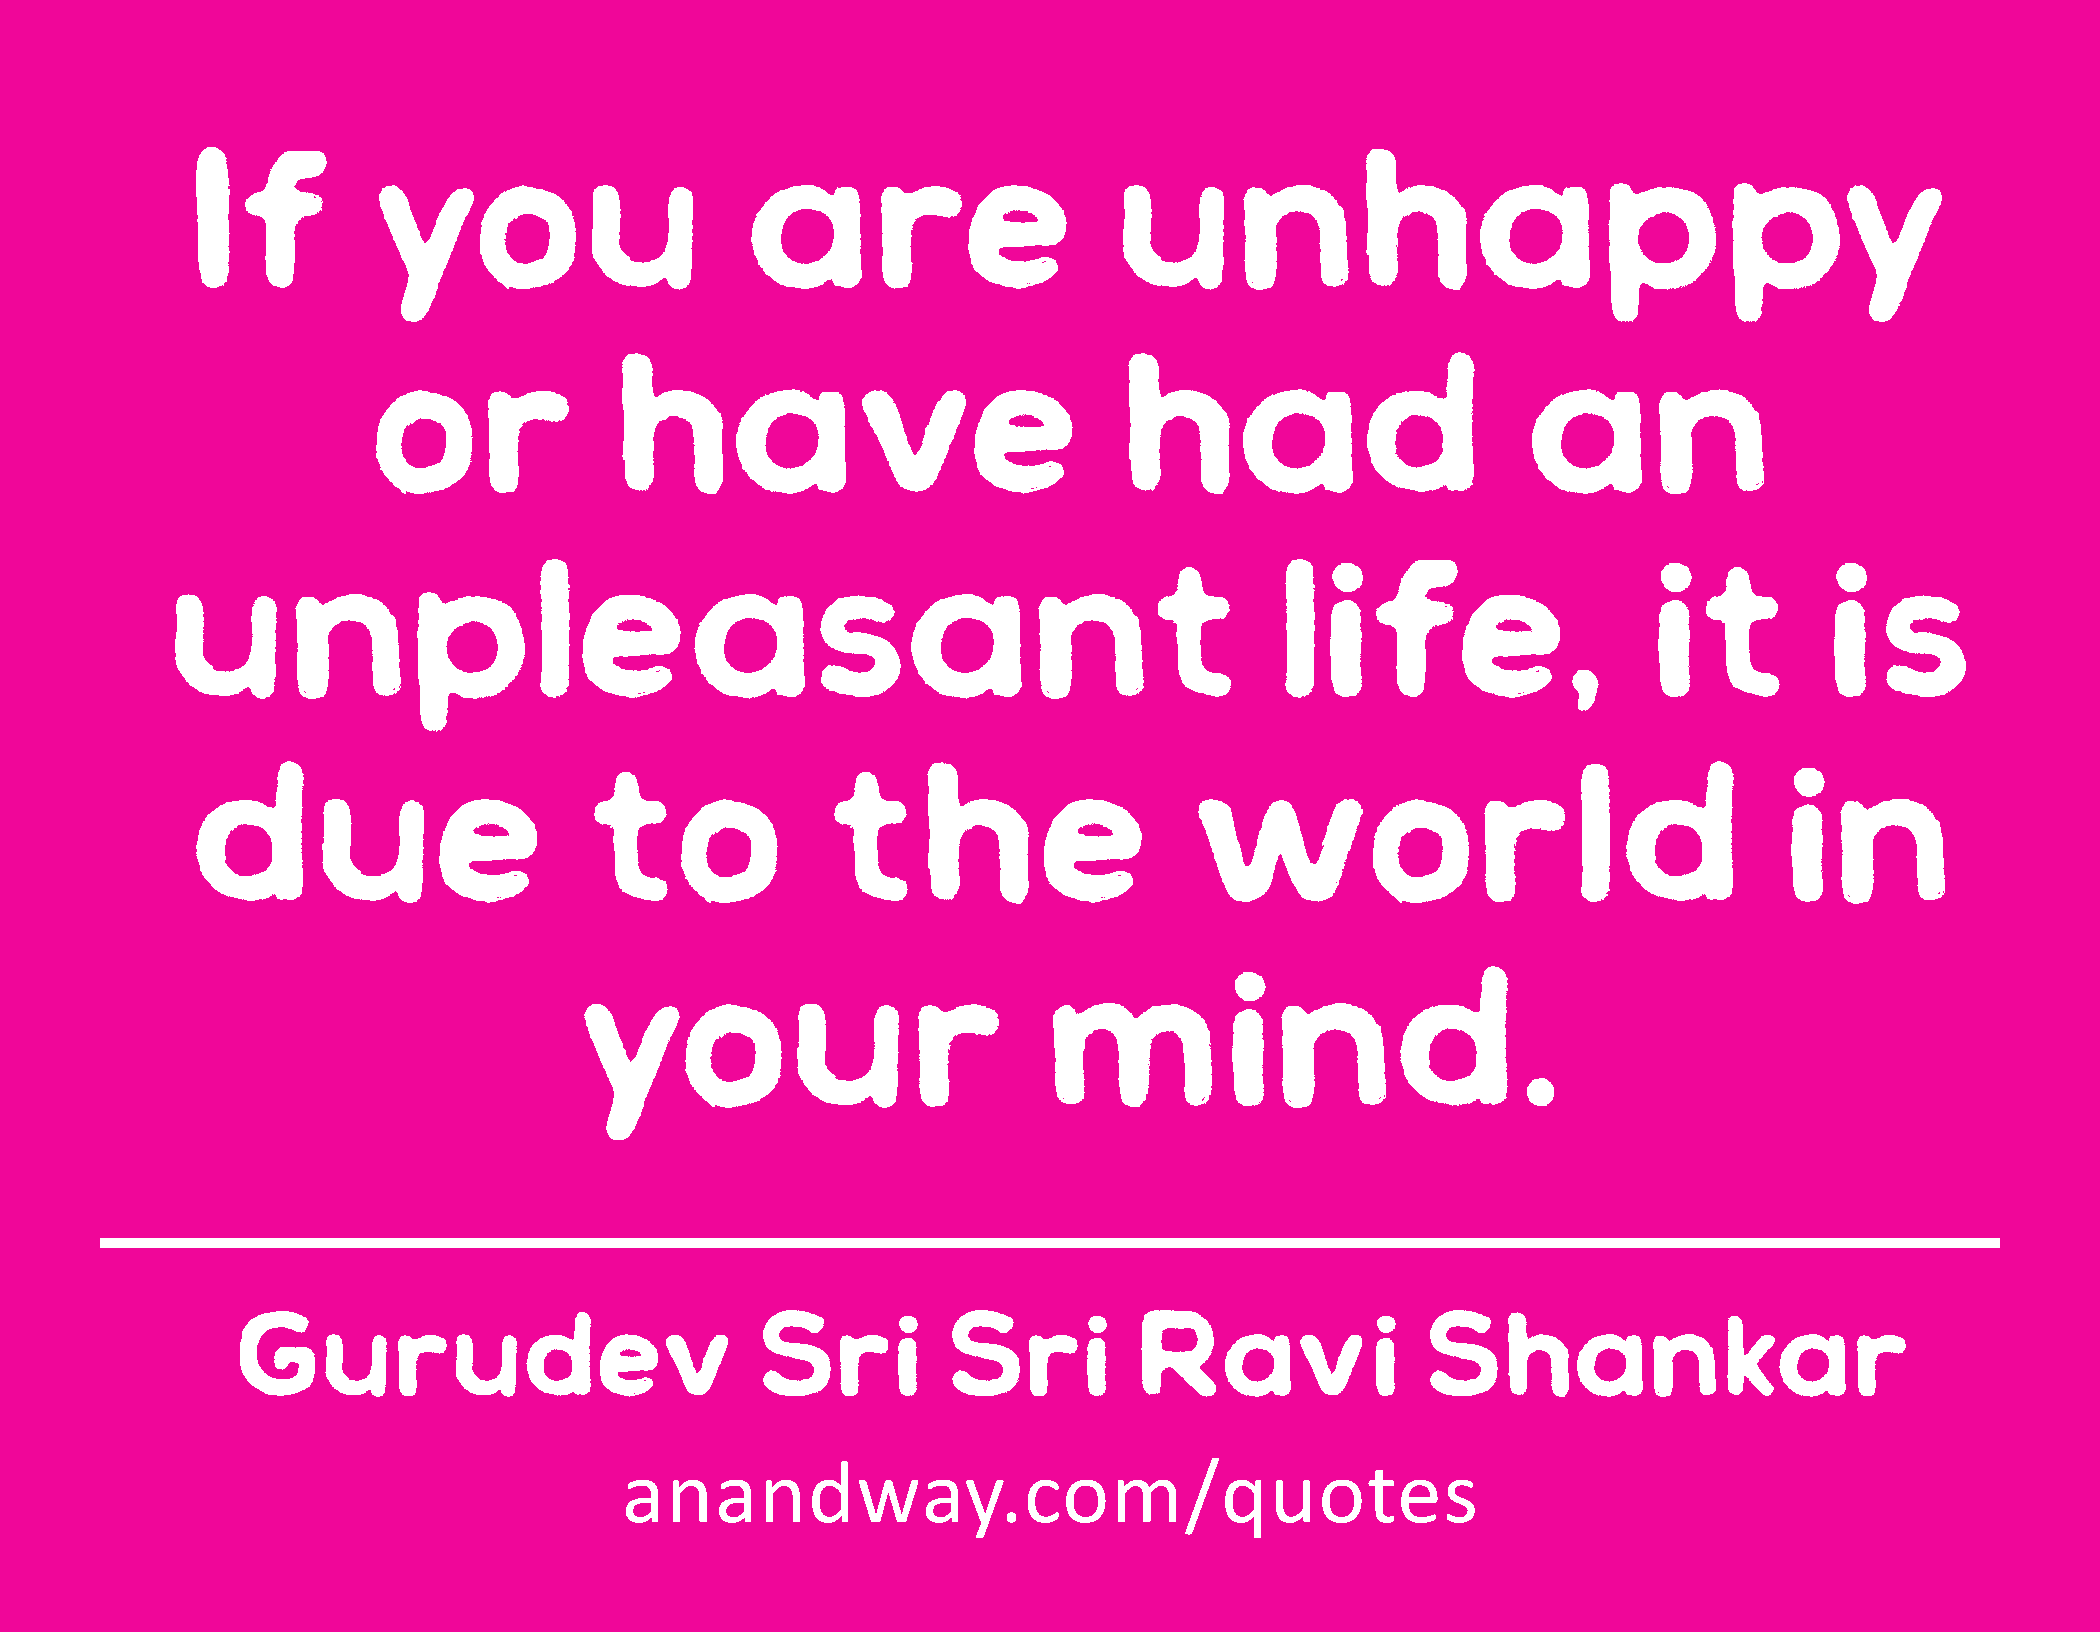 If you are unhappy or have had an unpleasant life, it is due to the world in your mind. 
 -Gurudev Sri Sri Ravi Shankar